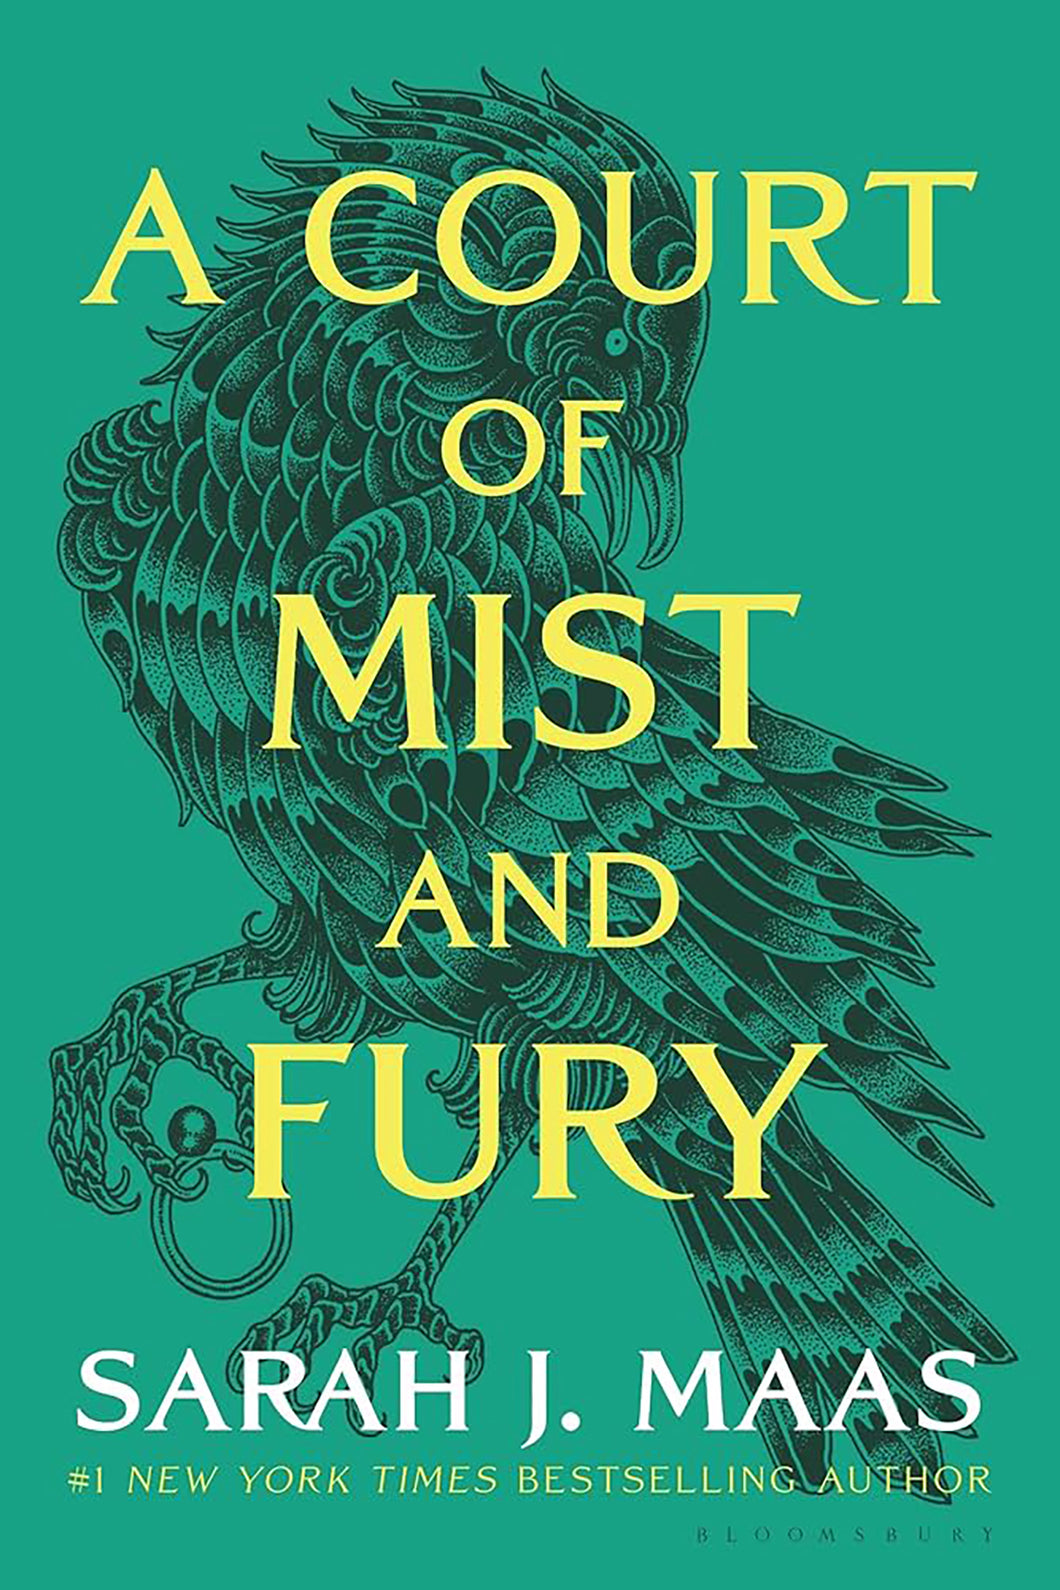 A Court of Mist and Fury by Sarah J. Maas / BOOK OR BUNDLE - Starting at $19!